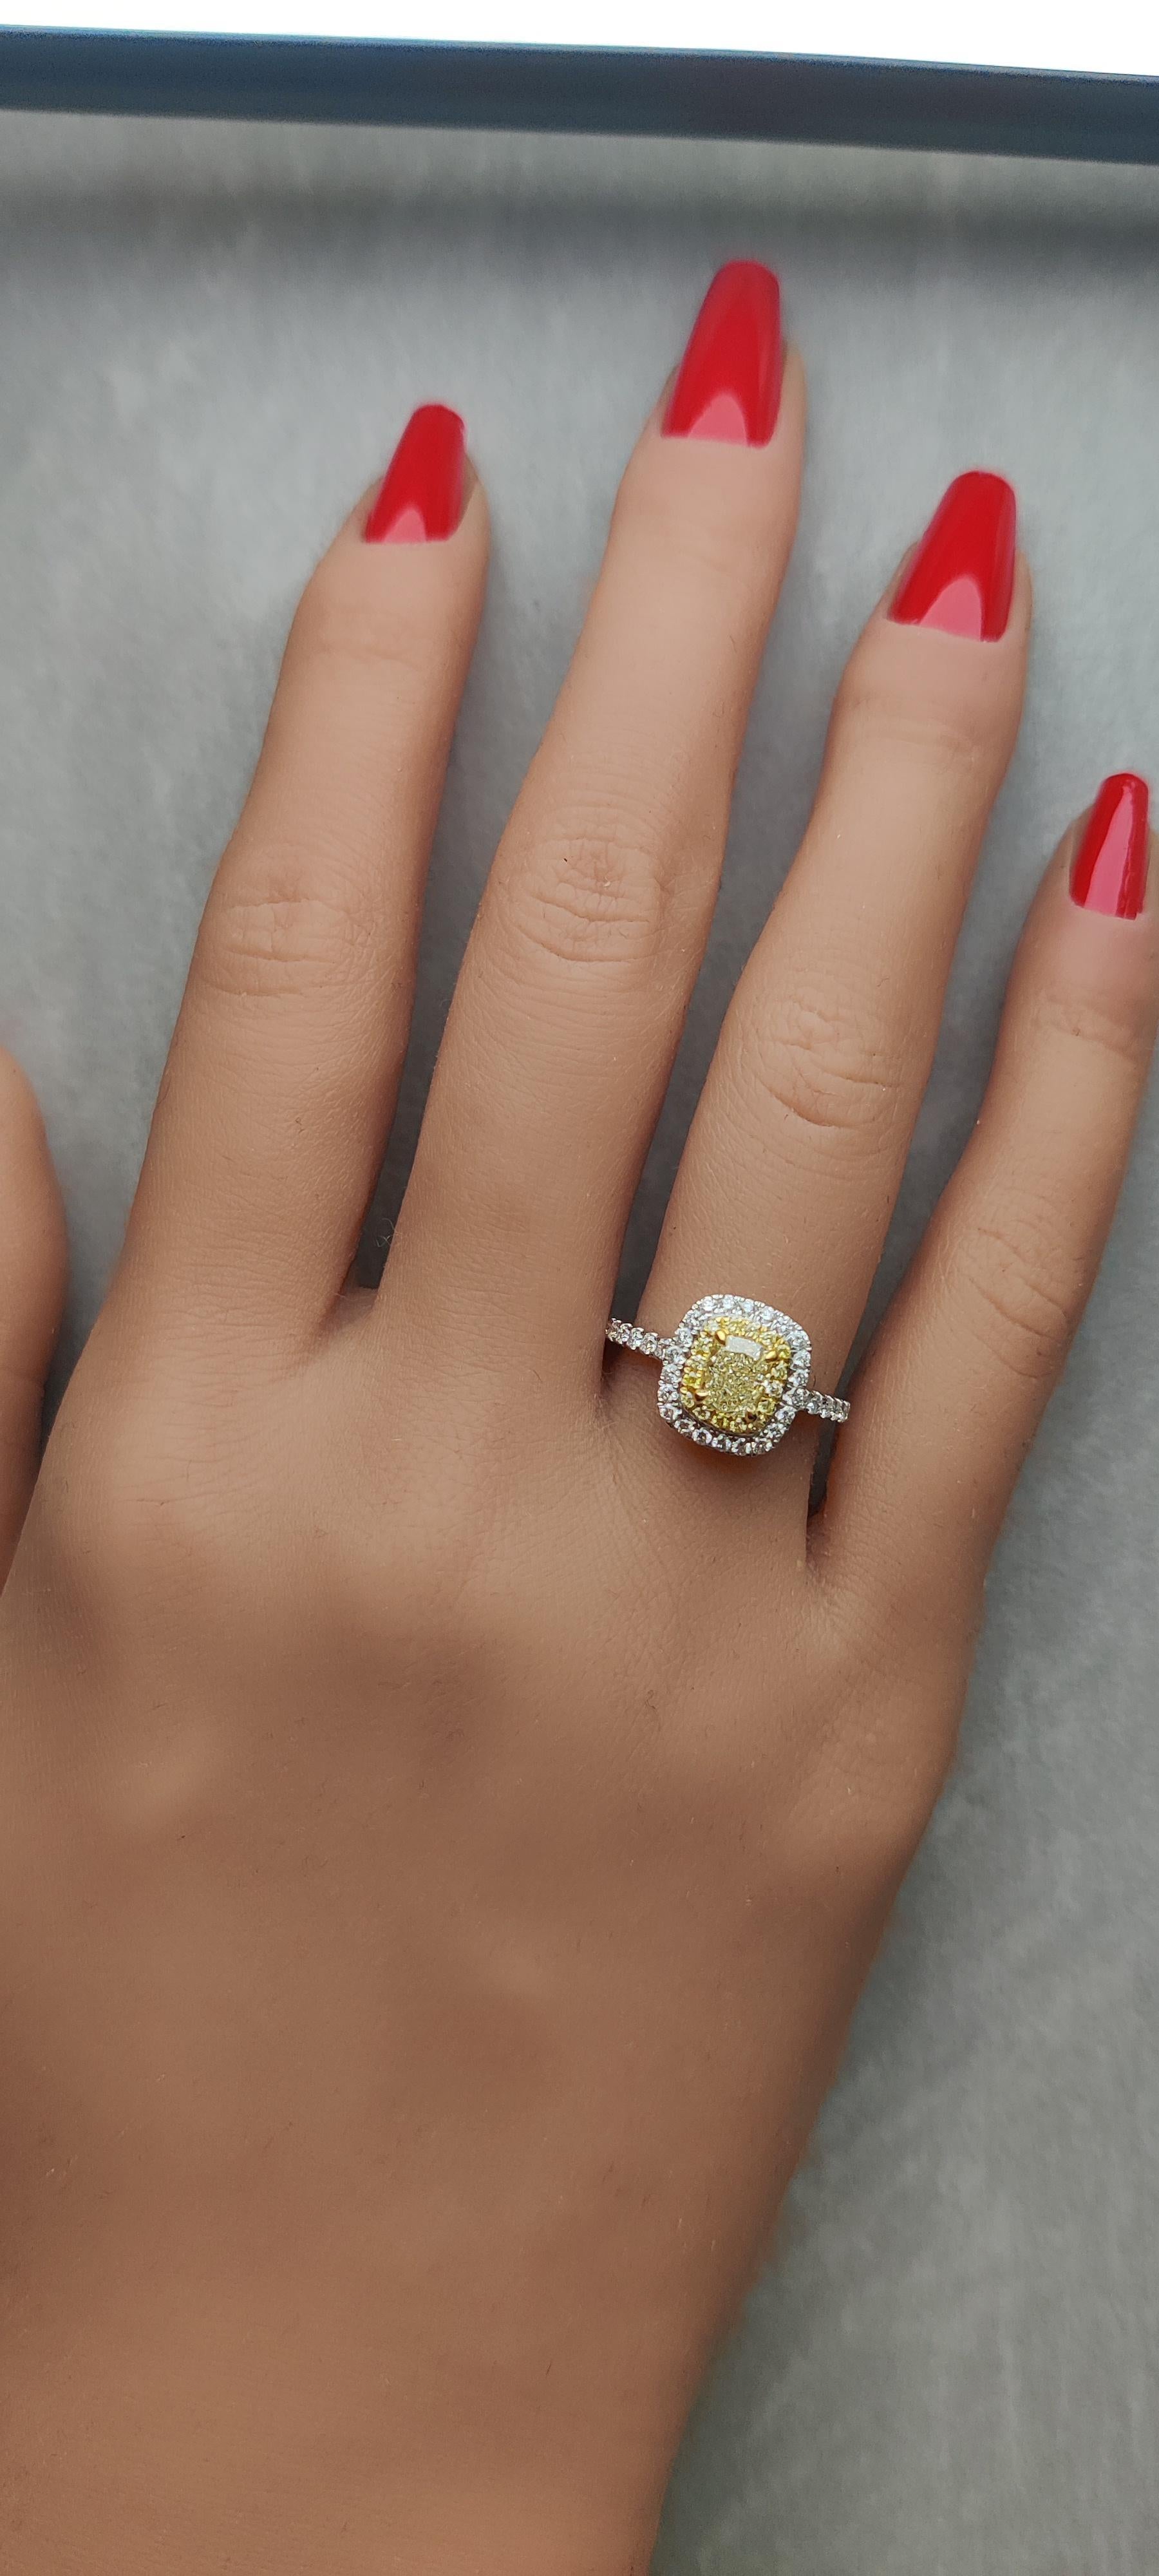 RareGemWorld's classic GIA certified diamond ring. Mounted in a beautiful 18K Yellow and White Gold setting with a natural cushion cut yellow diamond. The yellow diamond is surrounded by round natural yellow diamond melee and round natural white